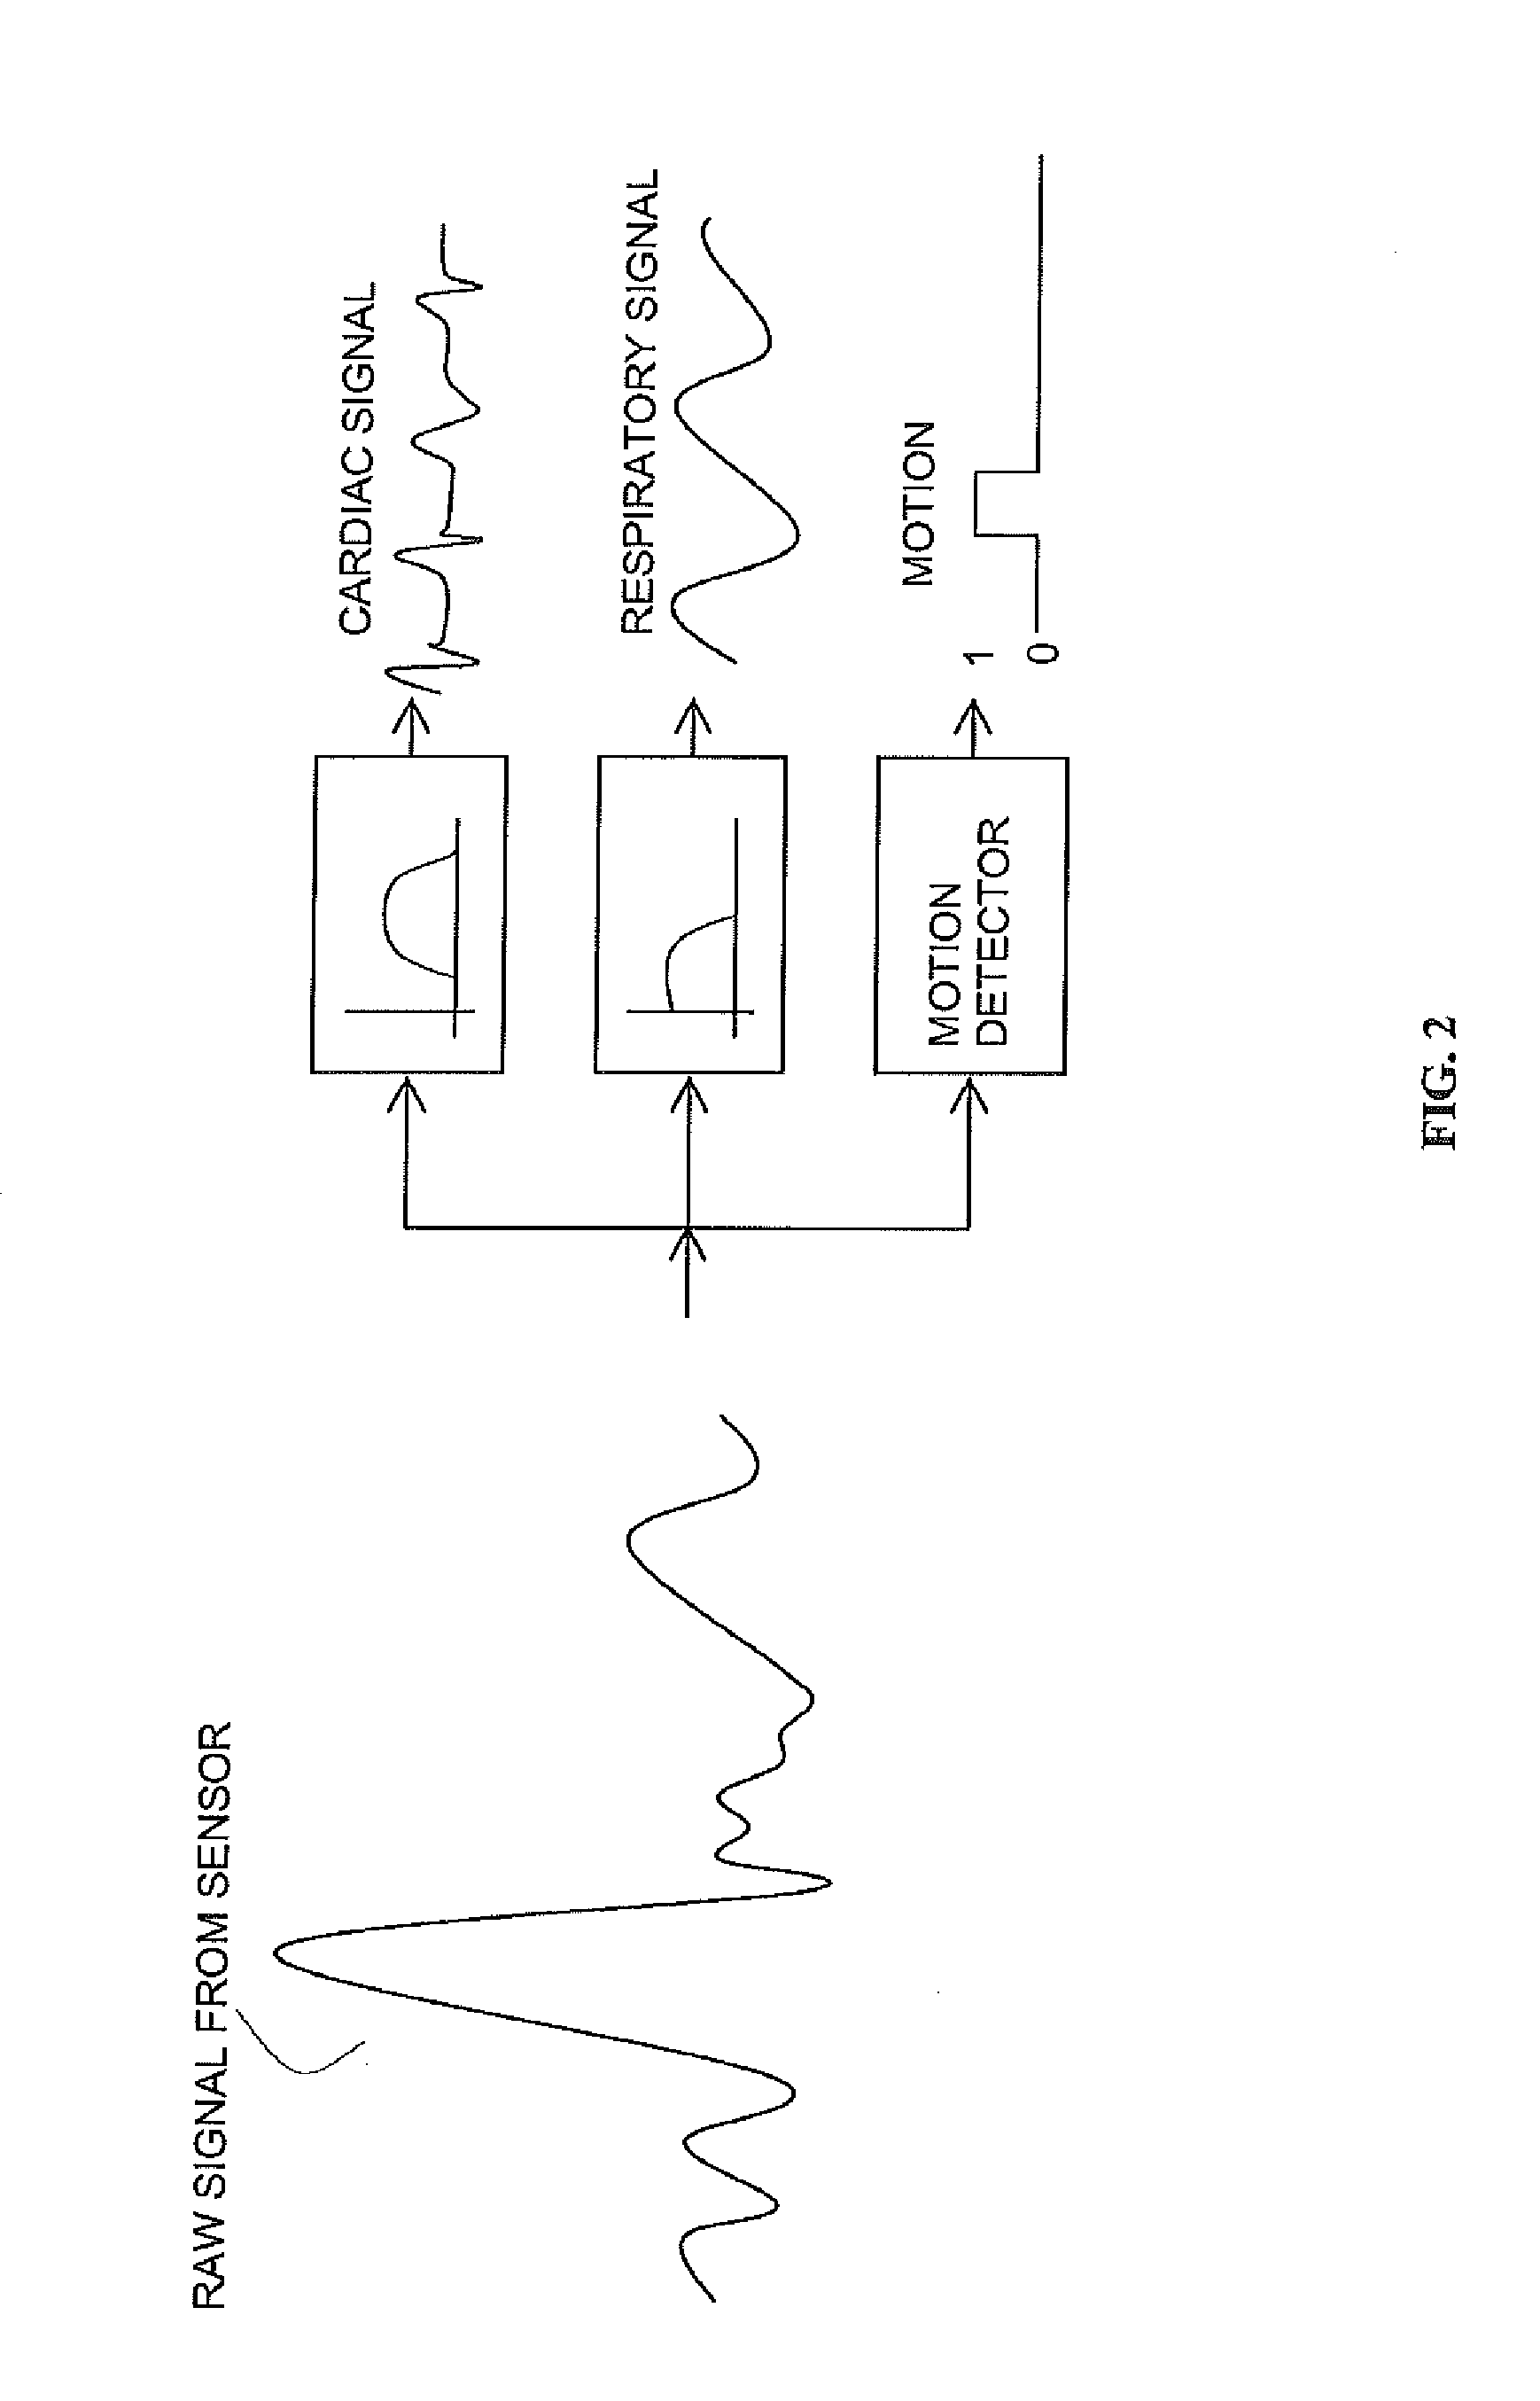 Apparatus, system, and method for monitoring physiological signs